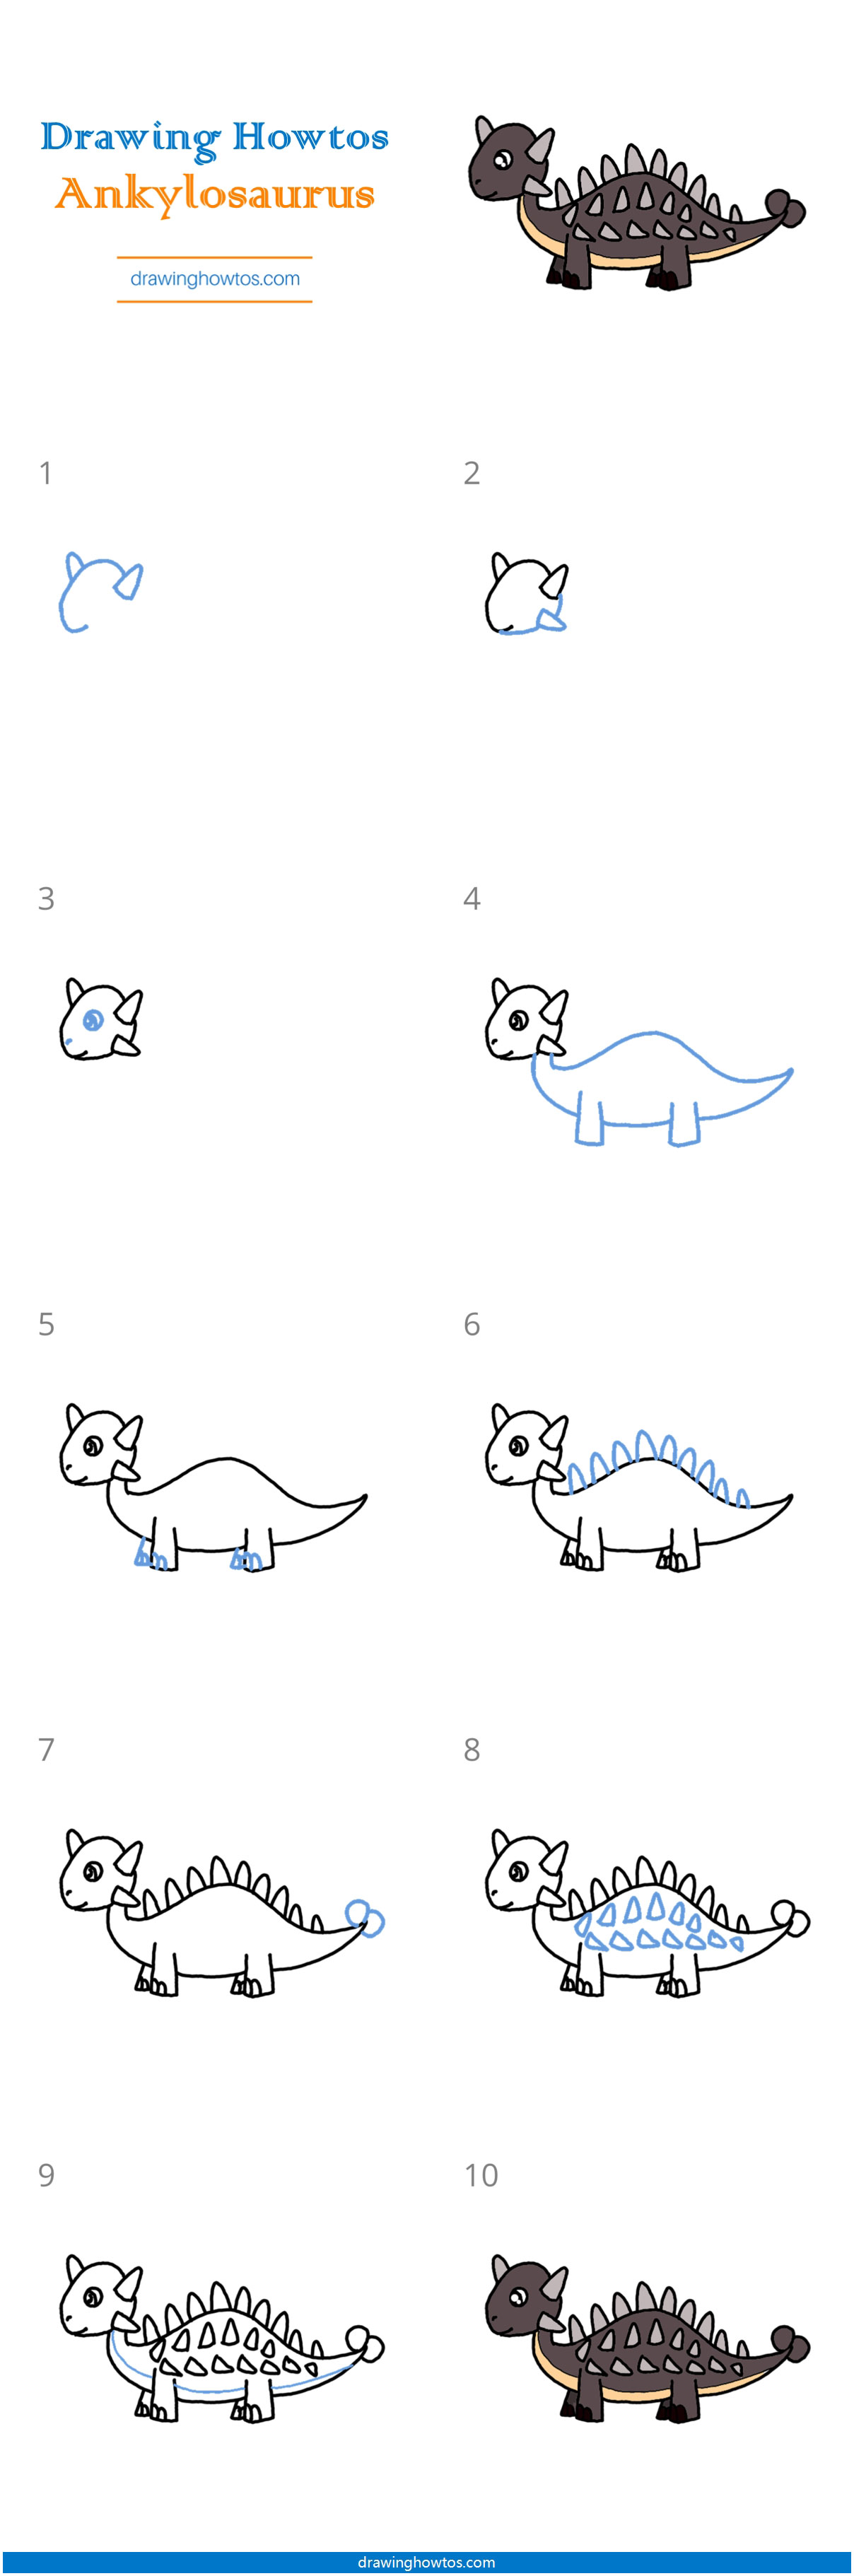 How to Draw an Ankylosaurus Step by Step